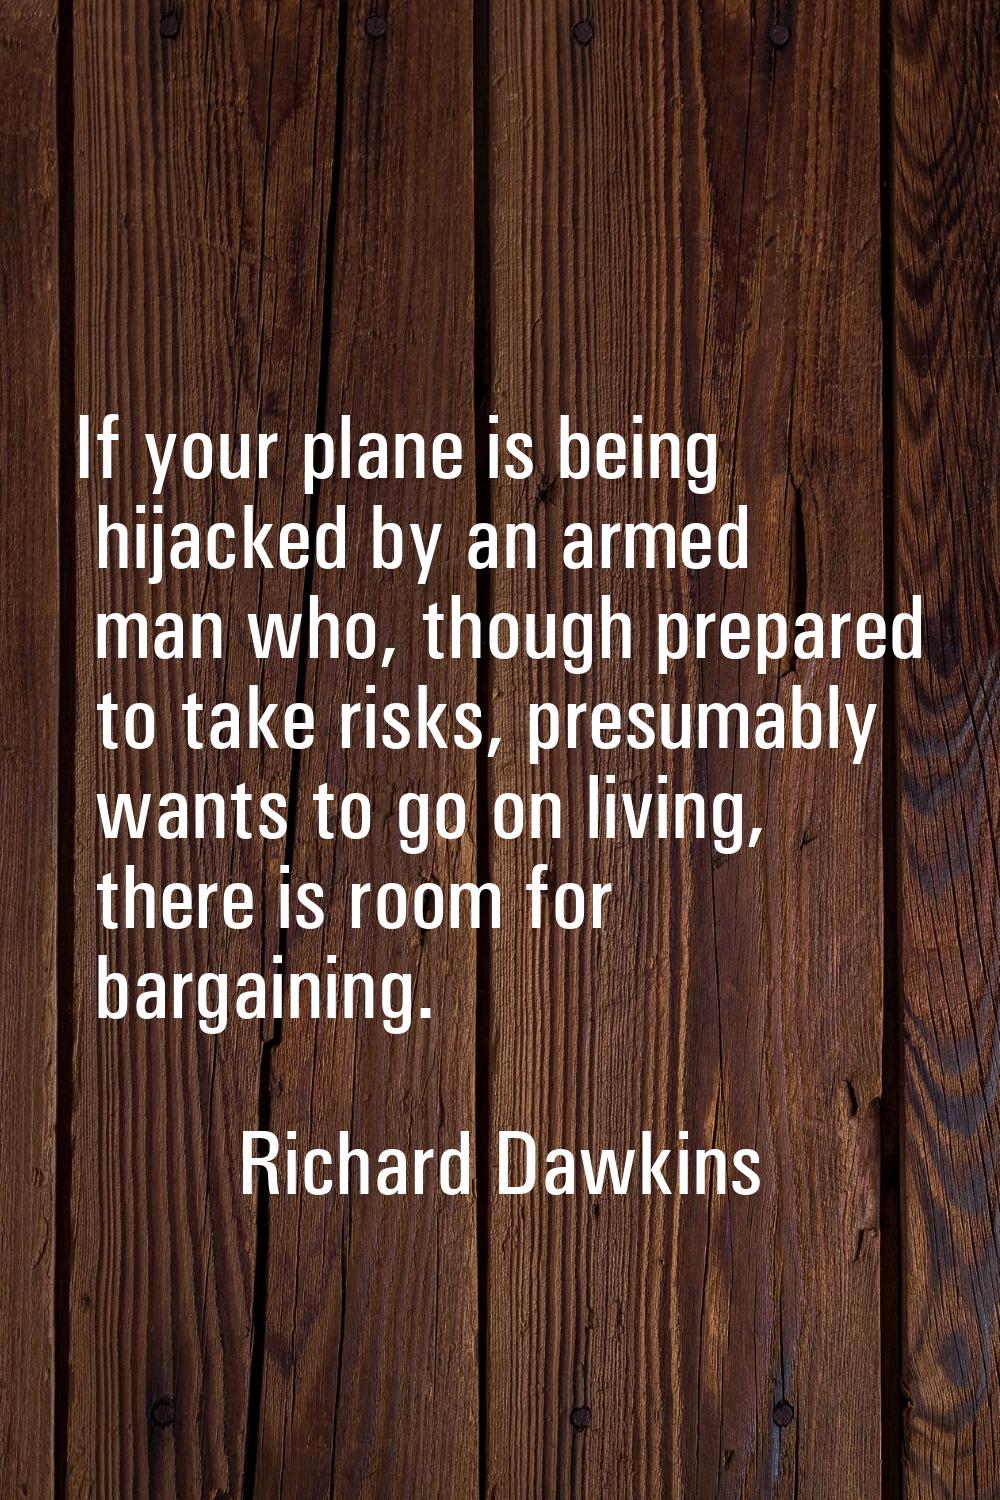 If your plane is being hijacked by an armed man who, though prepared to take risks, presumably want